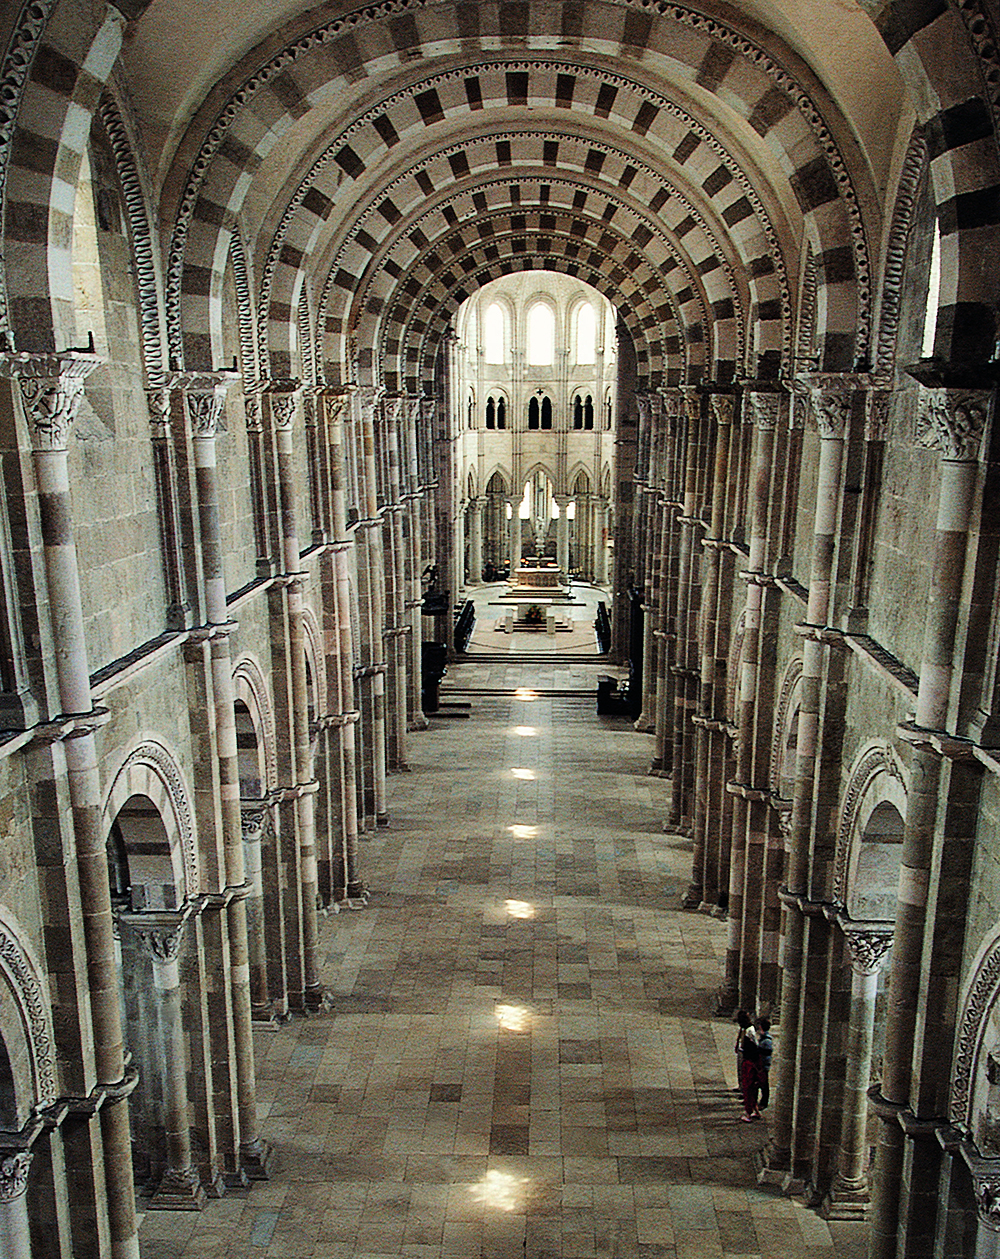 The Basilica Mary Magdalene of Vezelay Summer solstice path of light